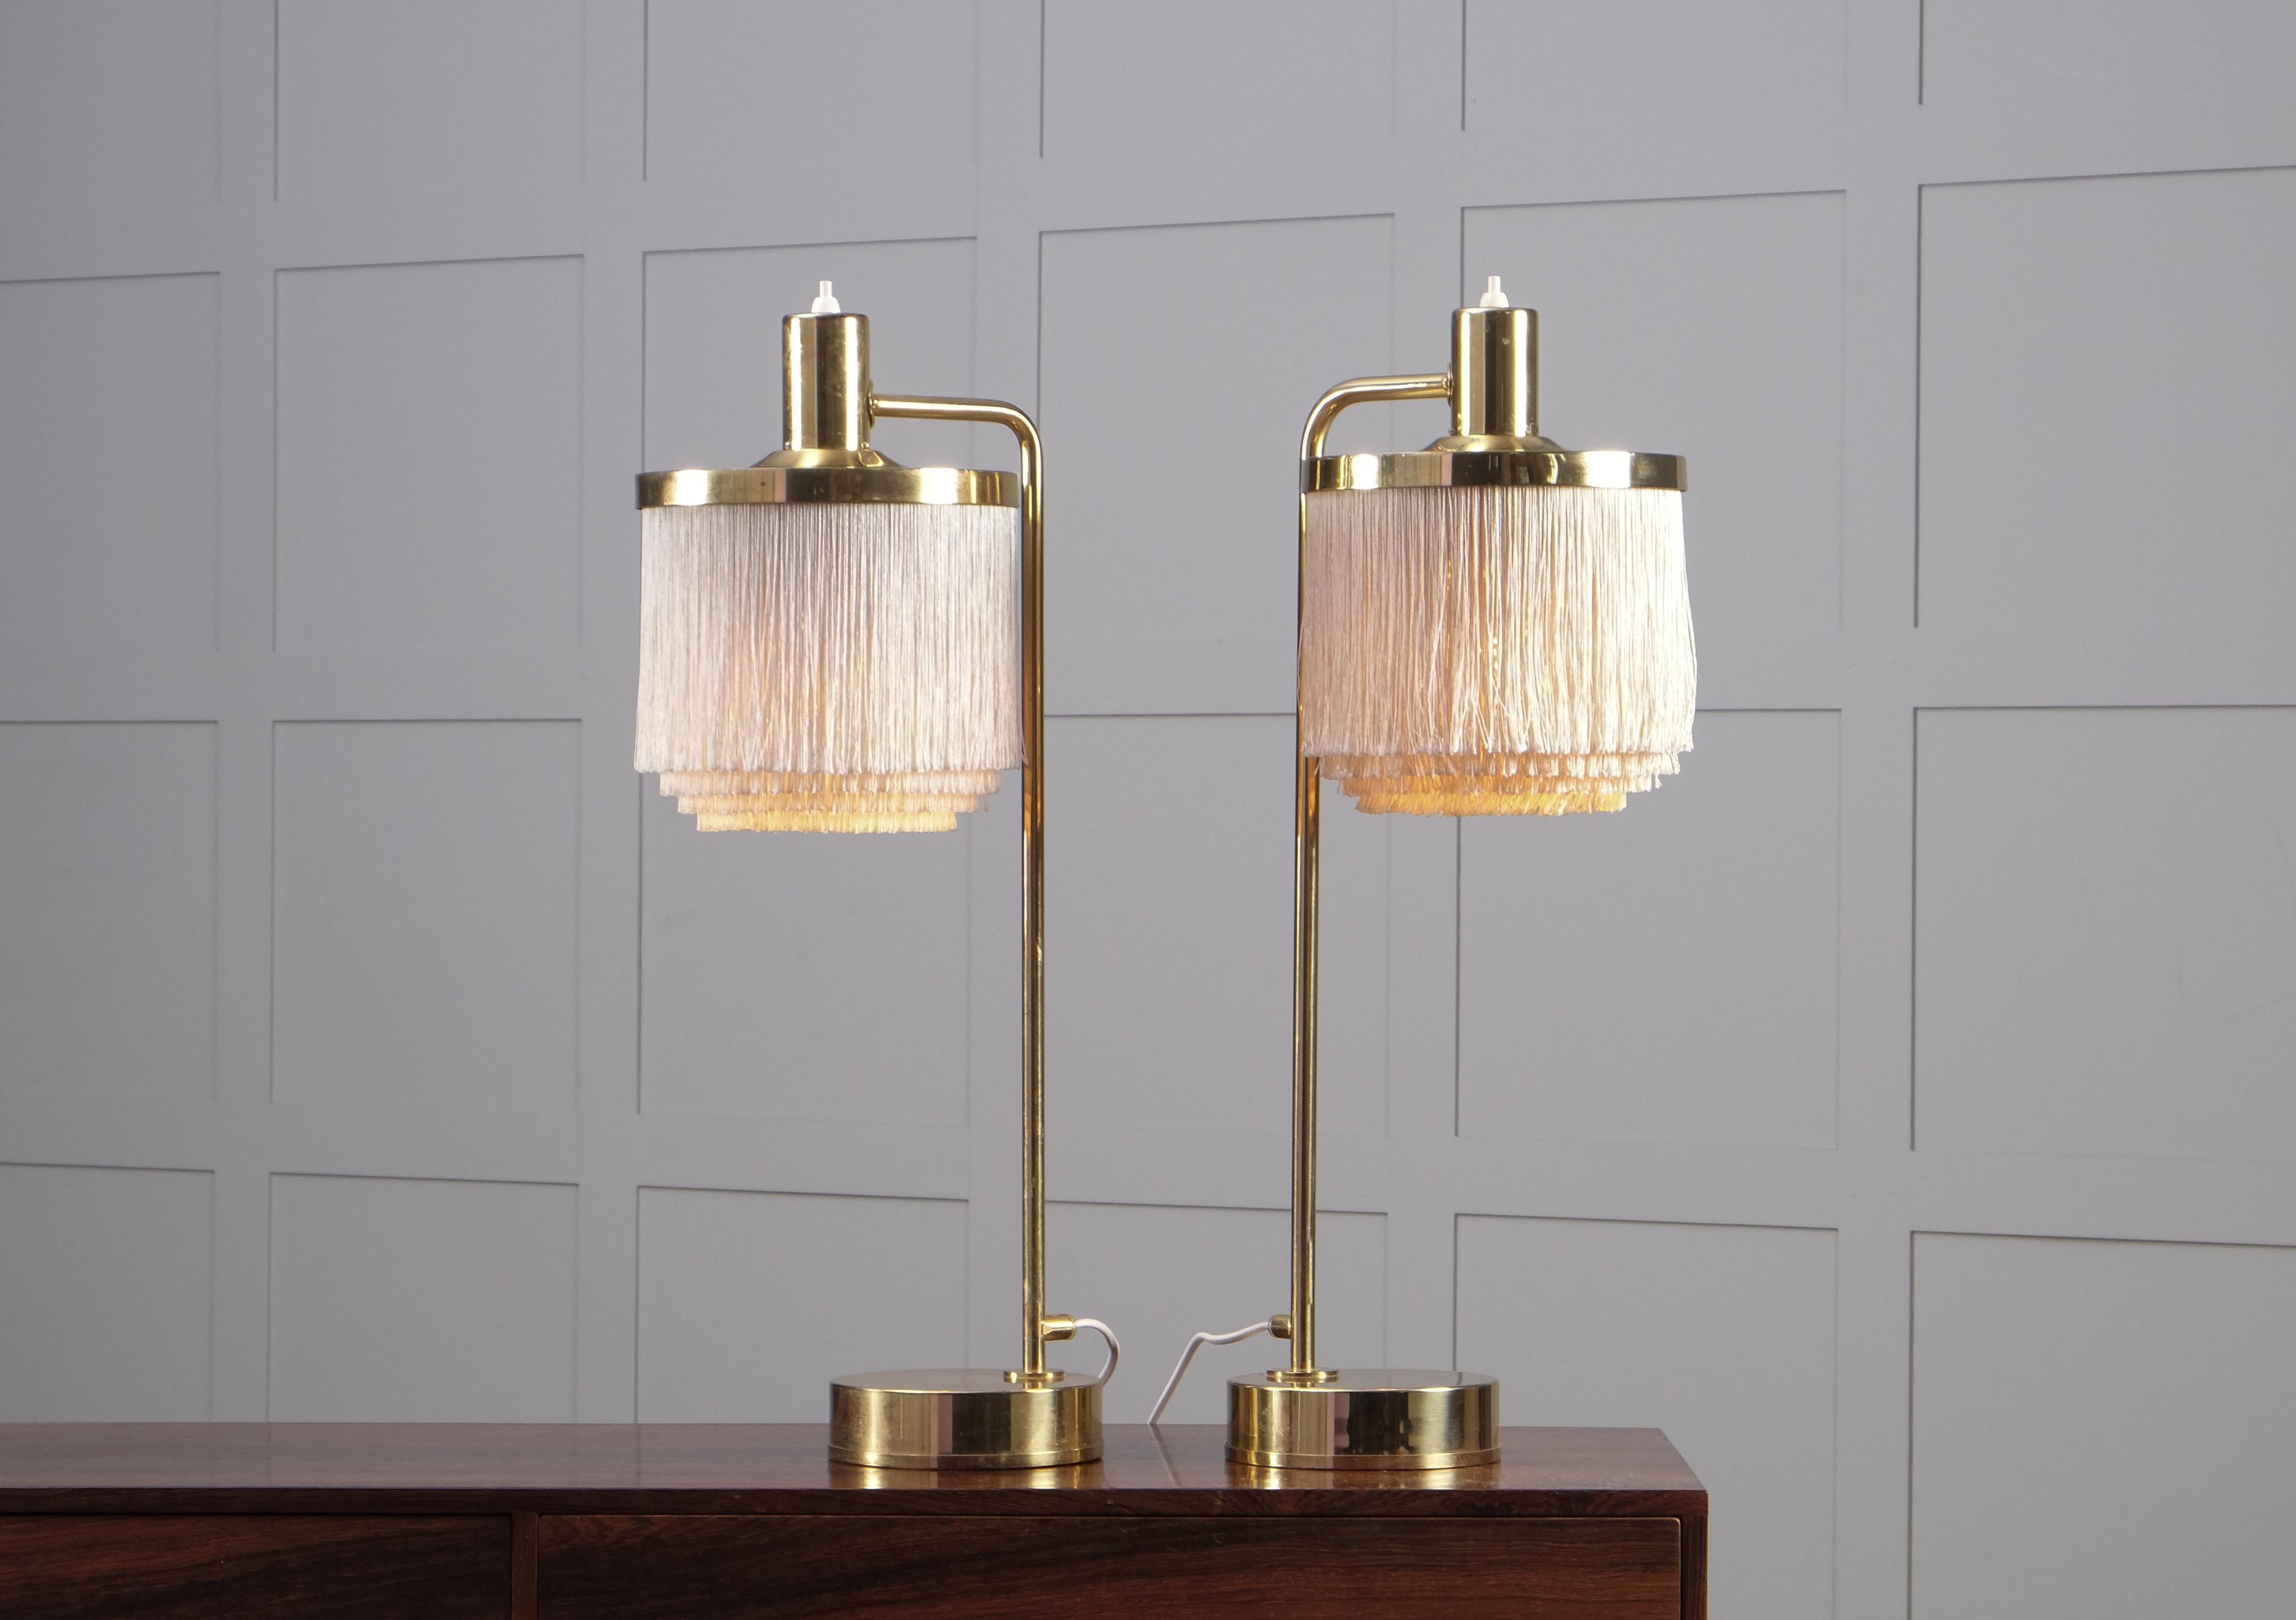 Pair of cream white table lamps produced by Hans-Agne Jakobsson in Markaryd, Sweden.
New wiring.